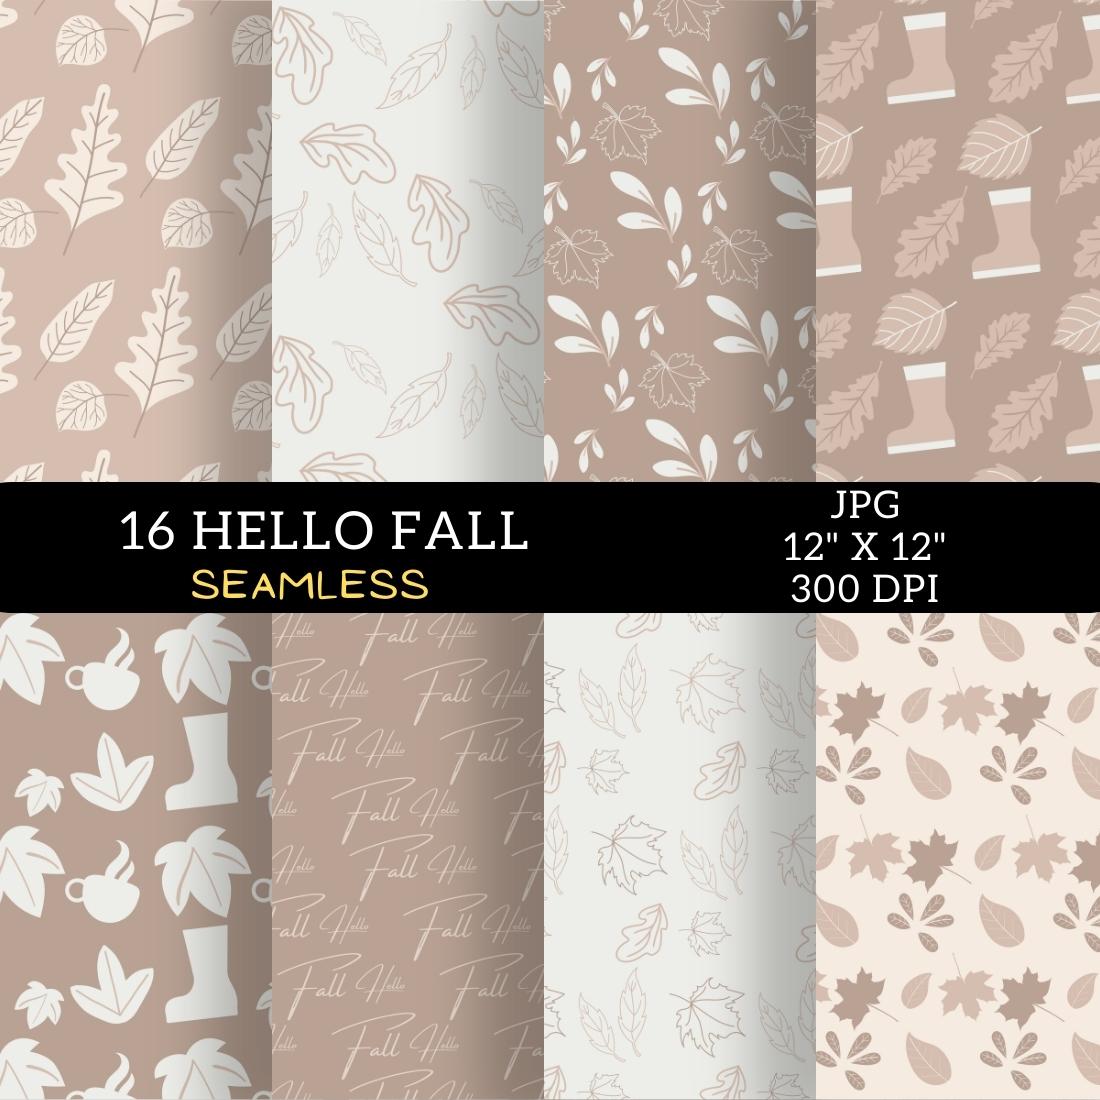 A pack of irresistible autumn-themed background patterns.